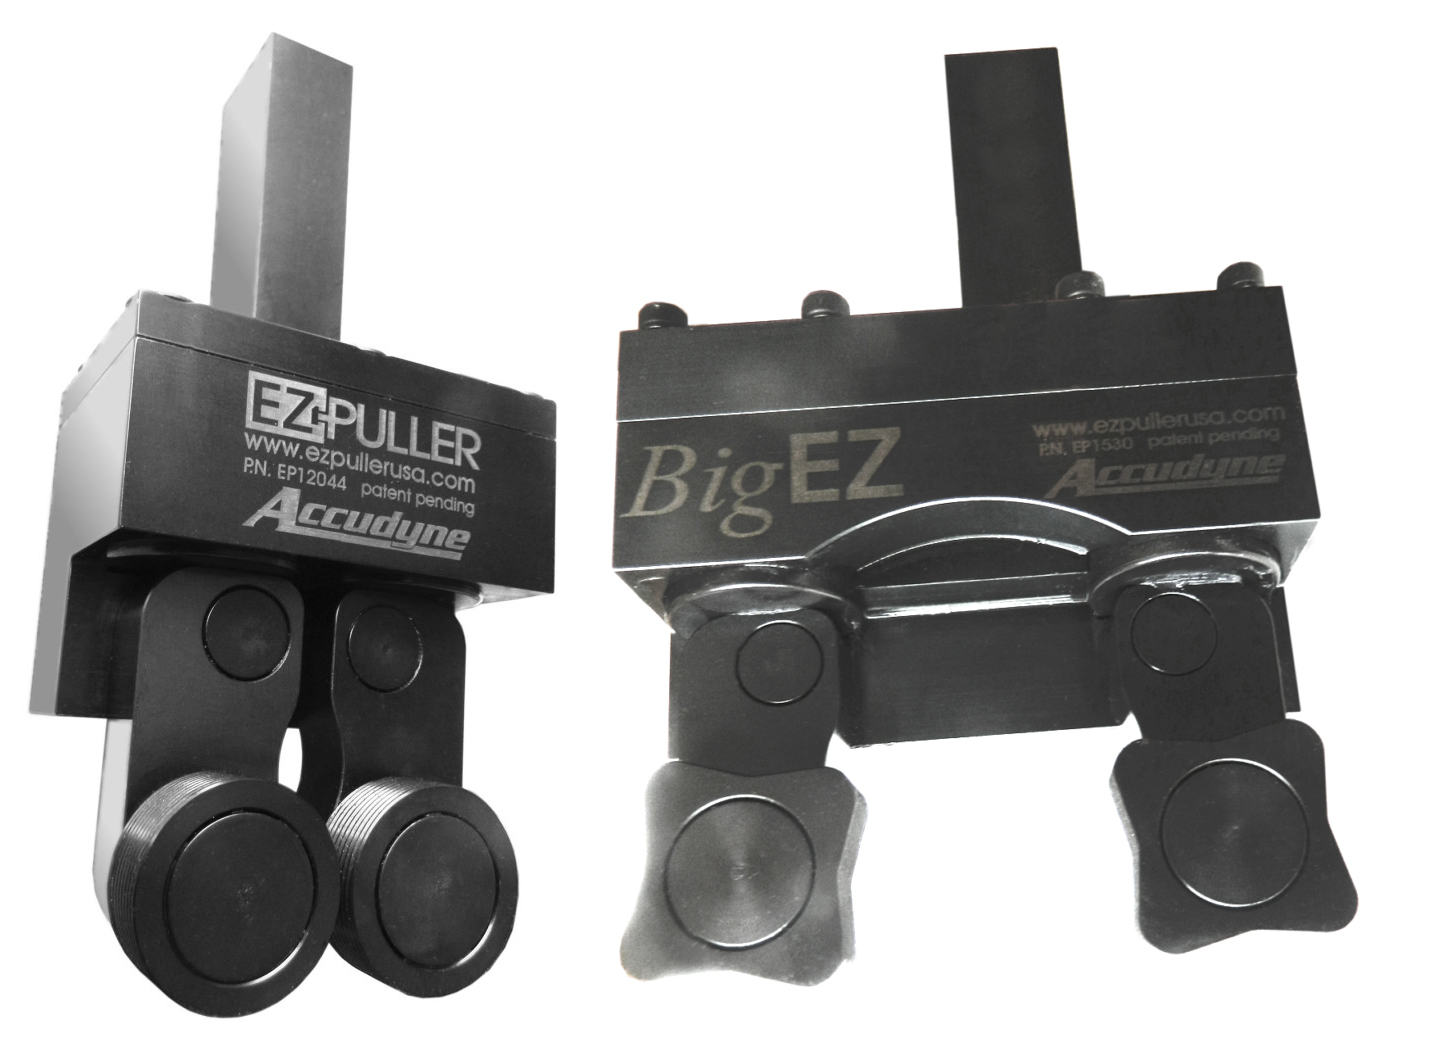 EZ-Puller – Accudyne Products